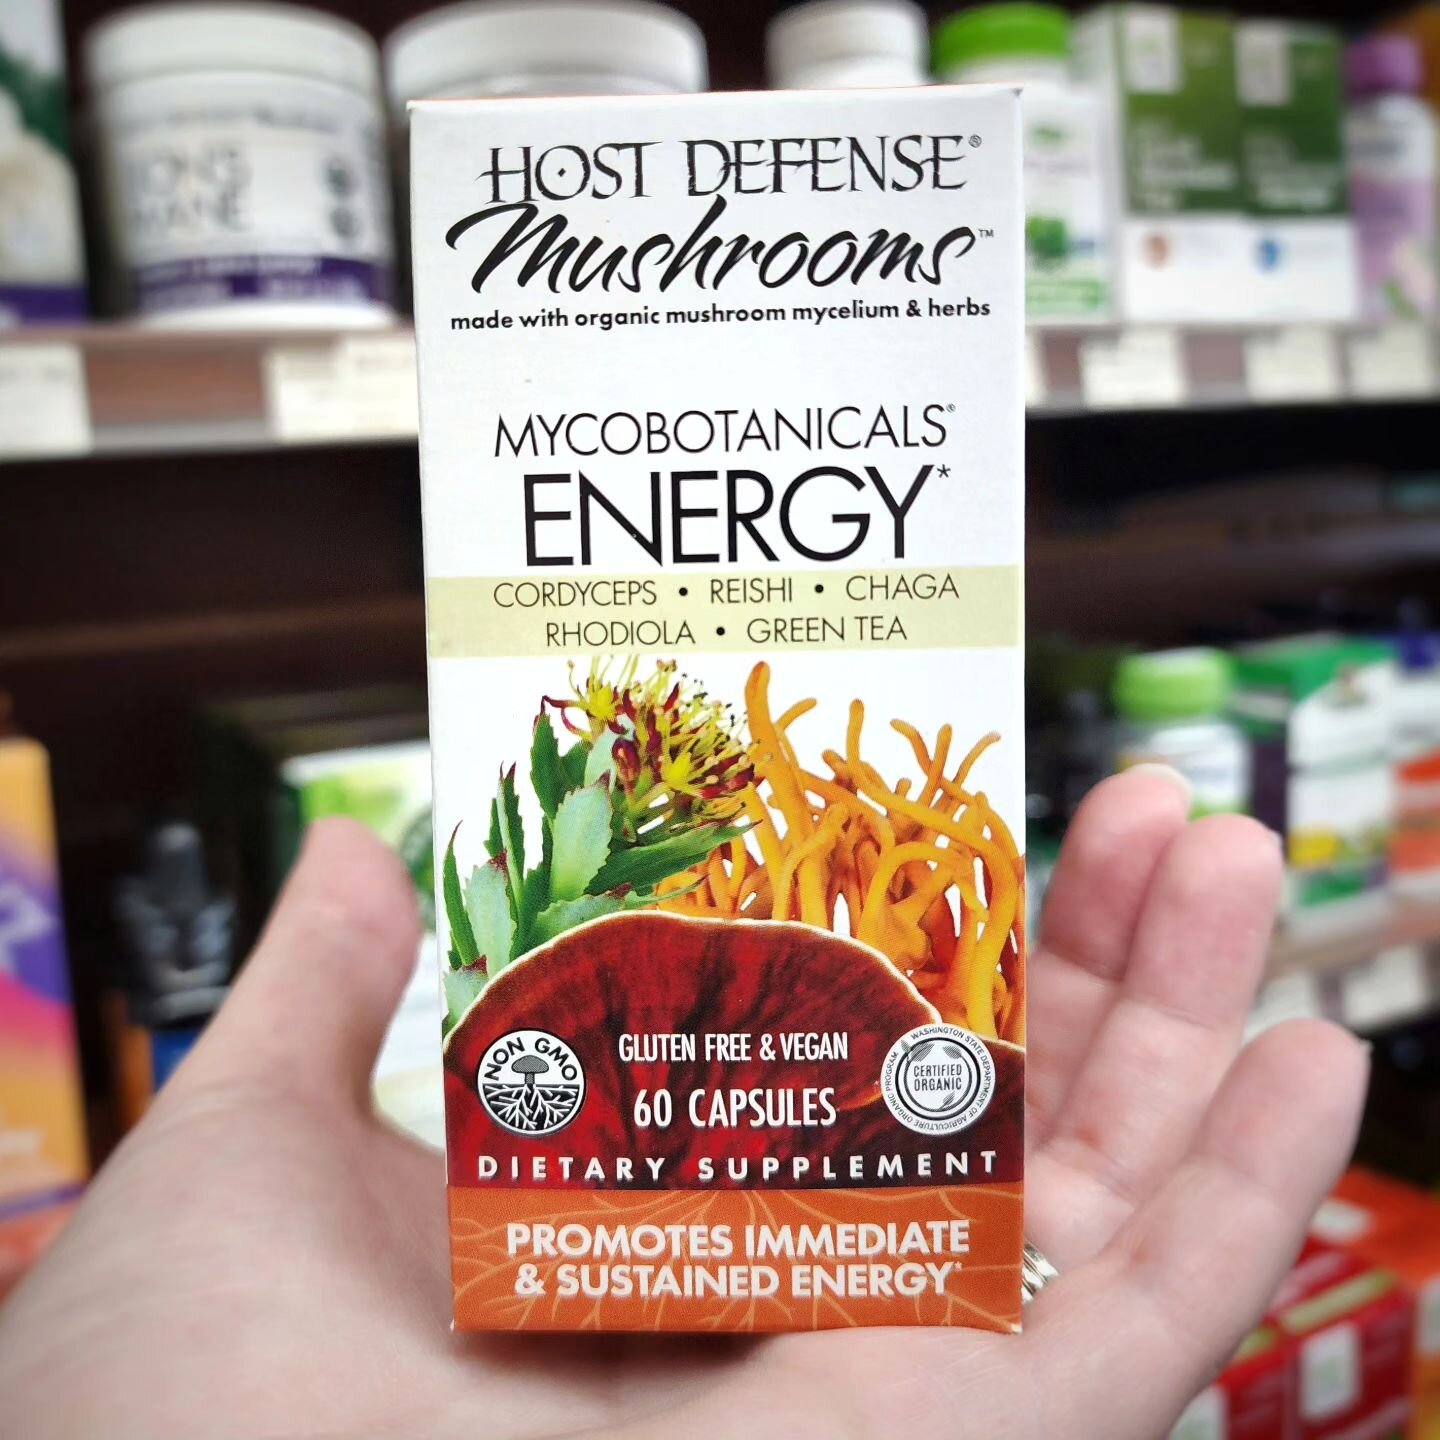 Promote immediate and sustained energy with Host Denfense's Energy formula!
✨️💥⚡️🍄🌿
Shop with us from 9a-6p!